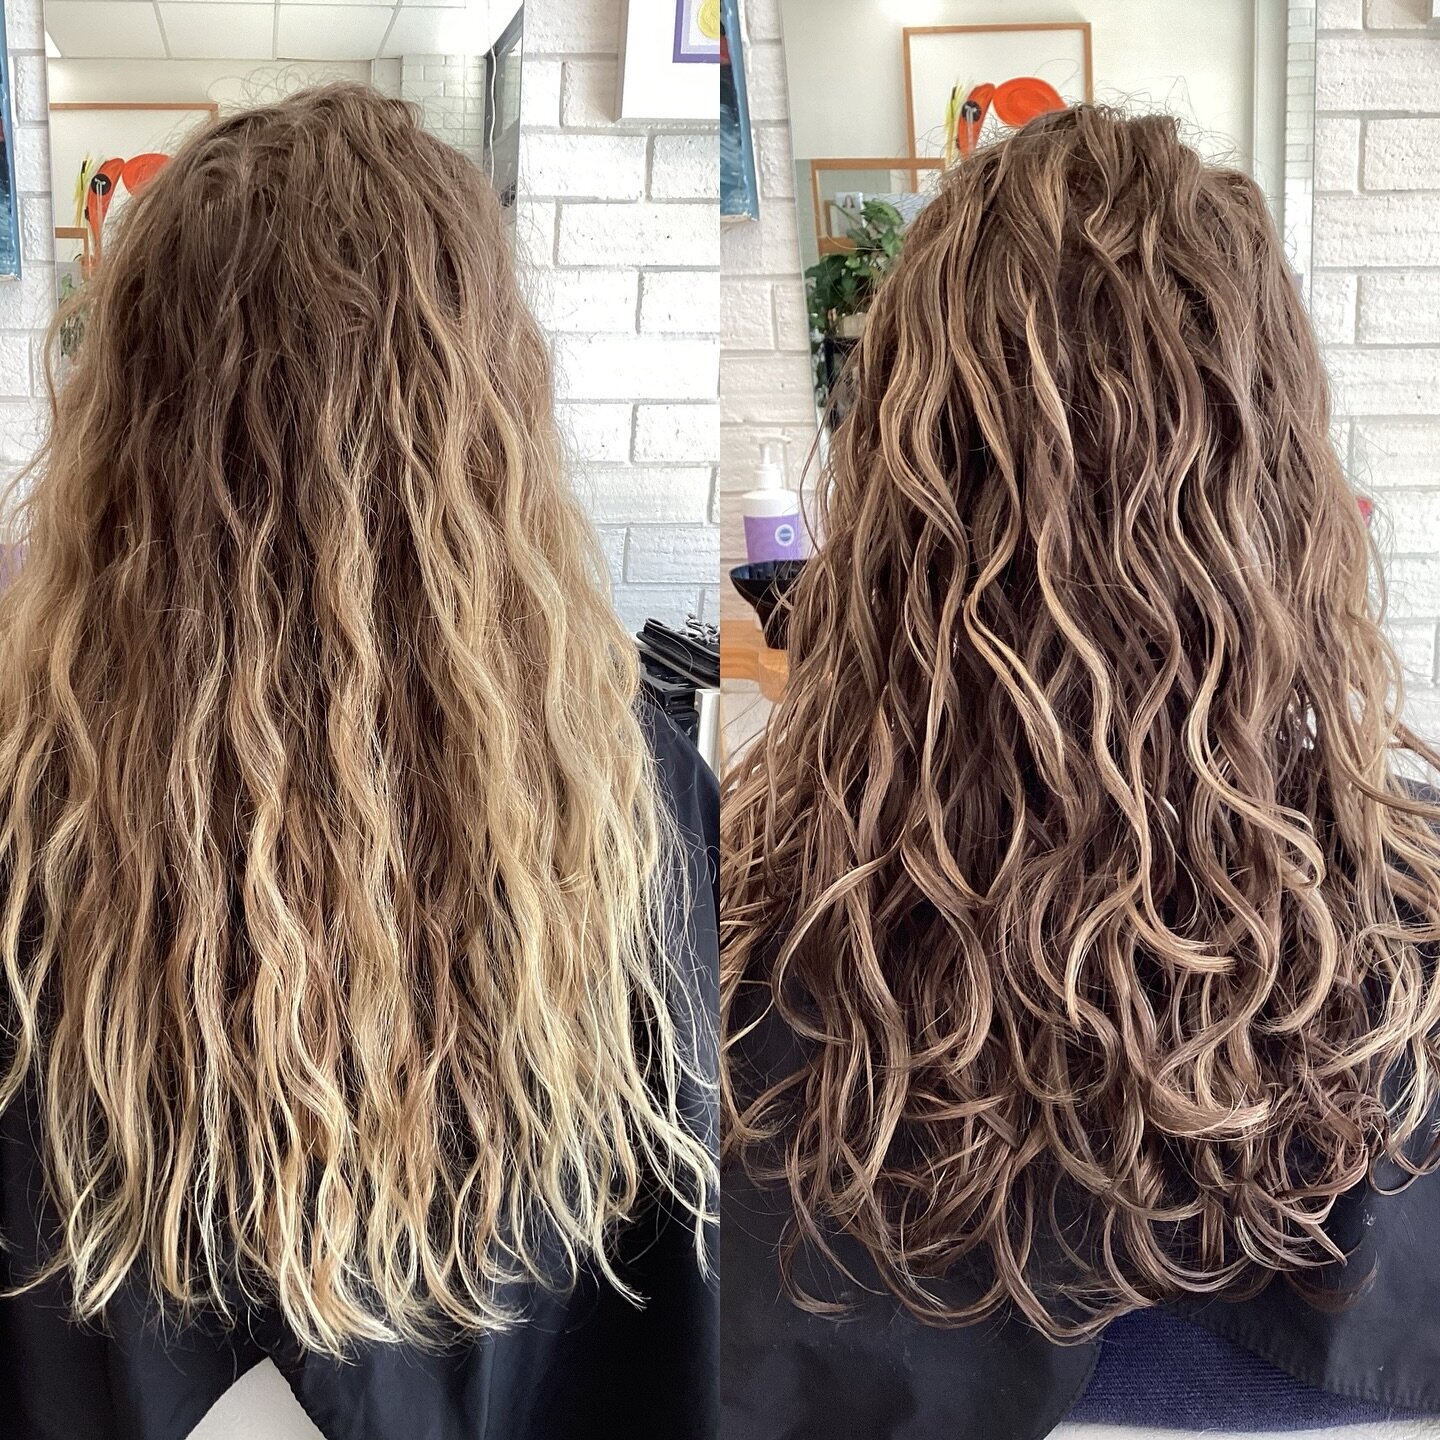 From solid blocky blonde to natural blended colour and hydrated curls 💖🤩
&bull;
@clever_curl #clevercurl 
@dnaorganics #dnaorganics 
&bull;
#blossomorganichair #ammoniafreecolour #veganhaircolour #hairsalonforster #naturalcolour #foils #crueltyfree